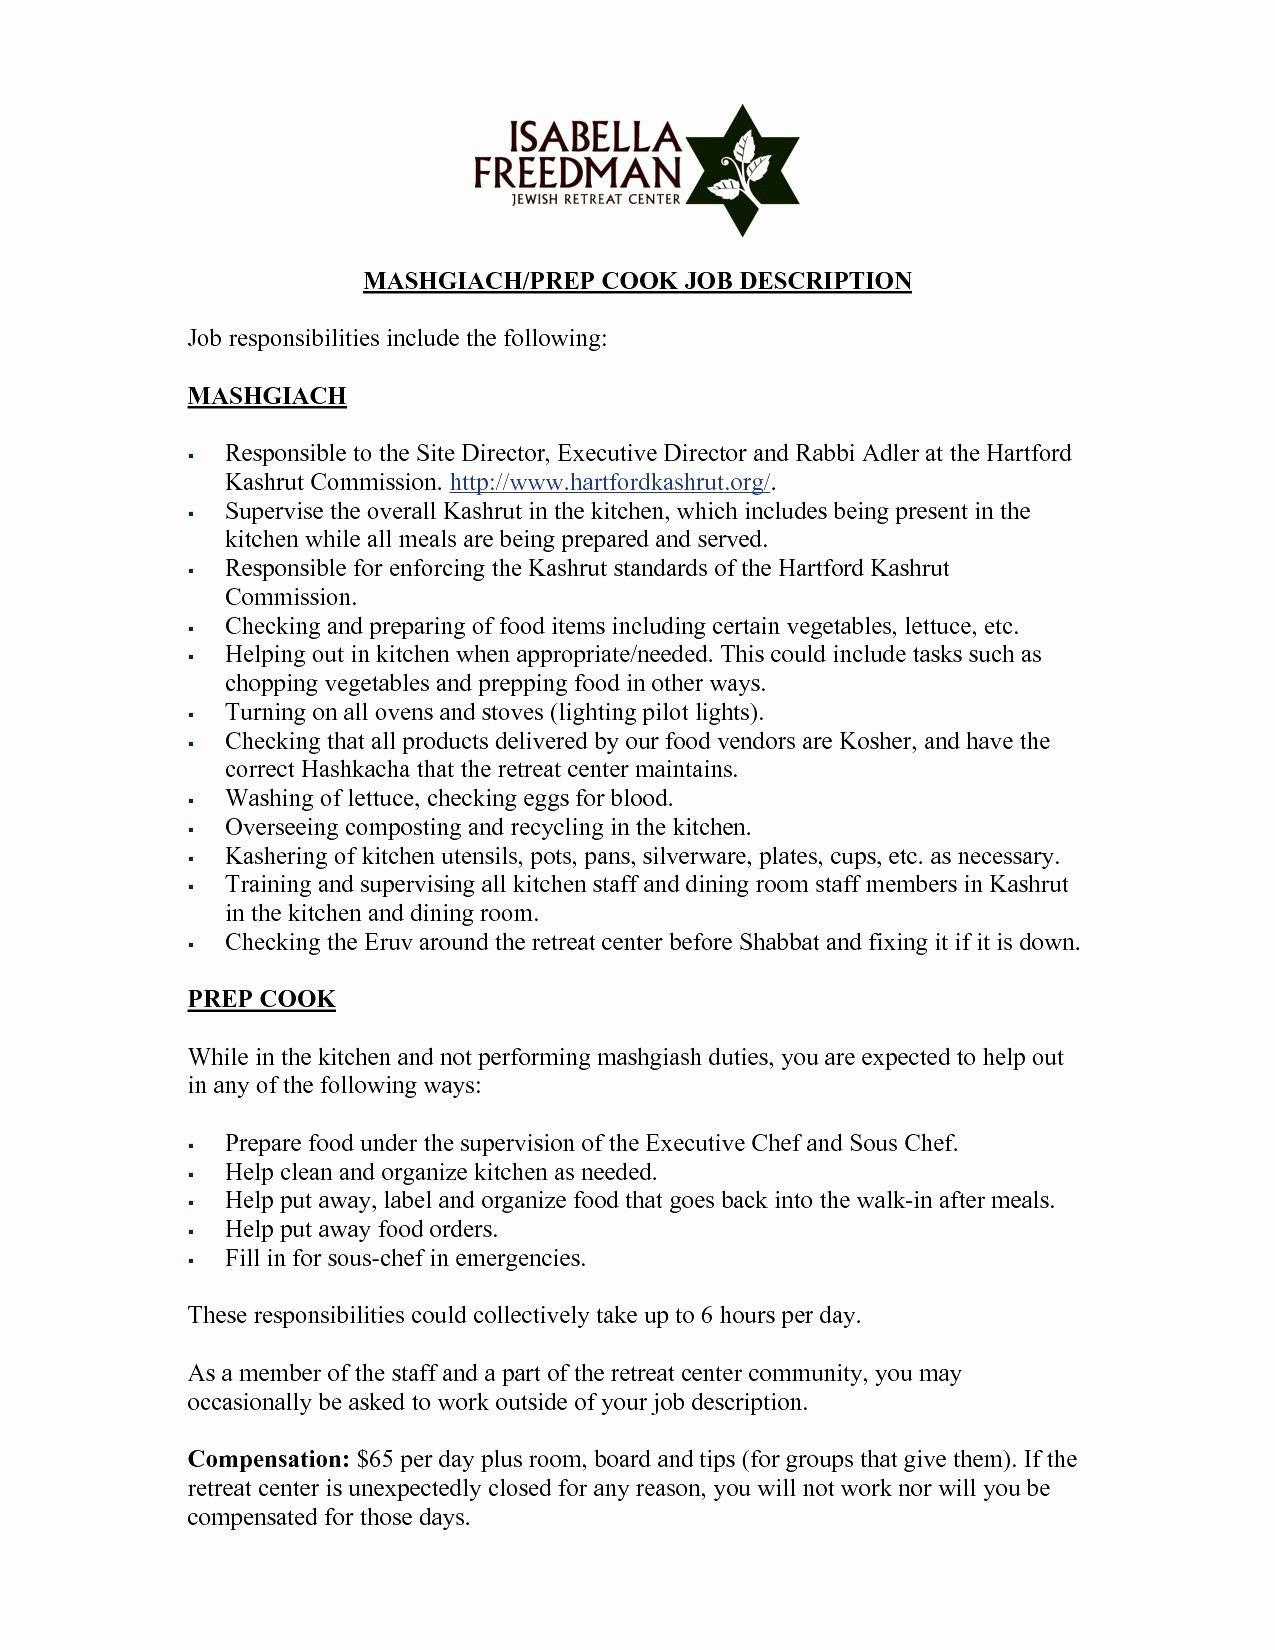 Cover Letter Template Google Docs - Free Resume Templates Google Docs New Luxury Cover Letter Template